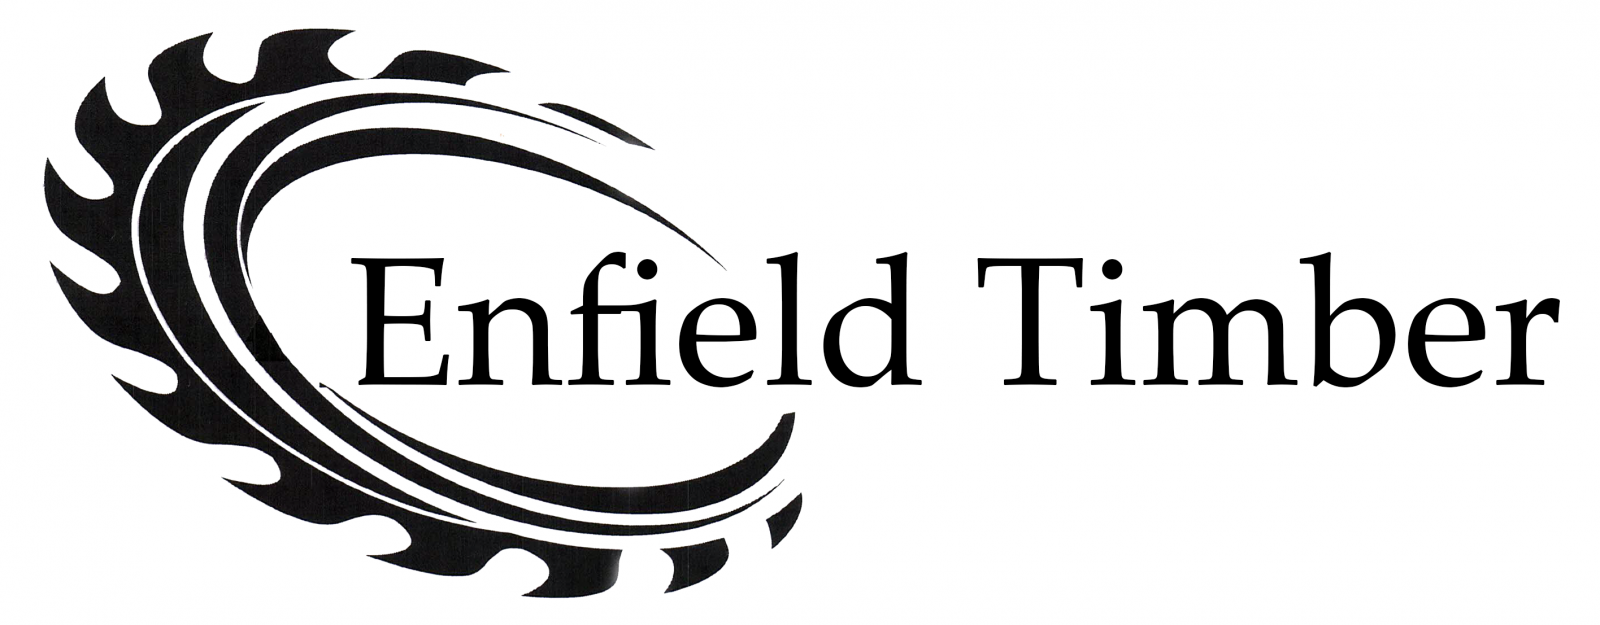 Enfield Timber